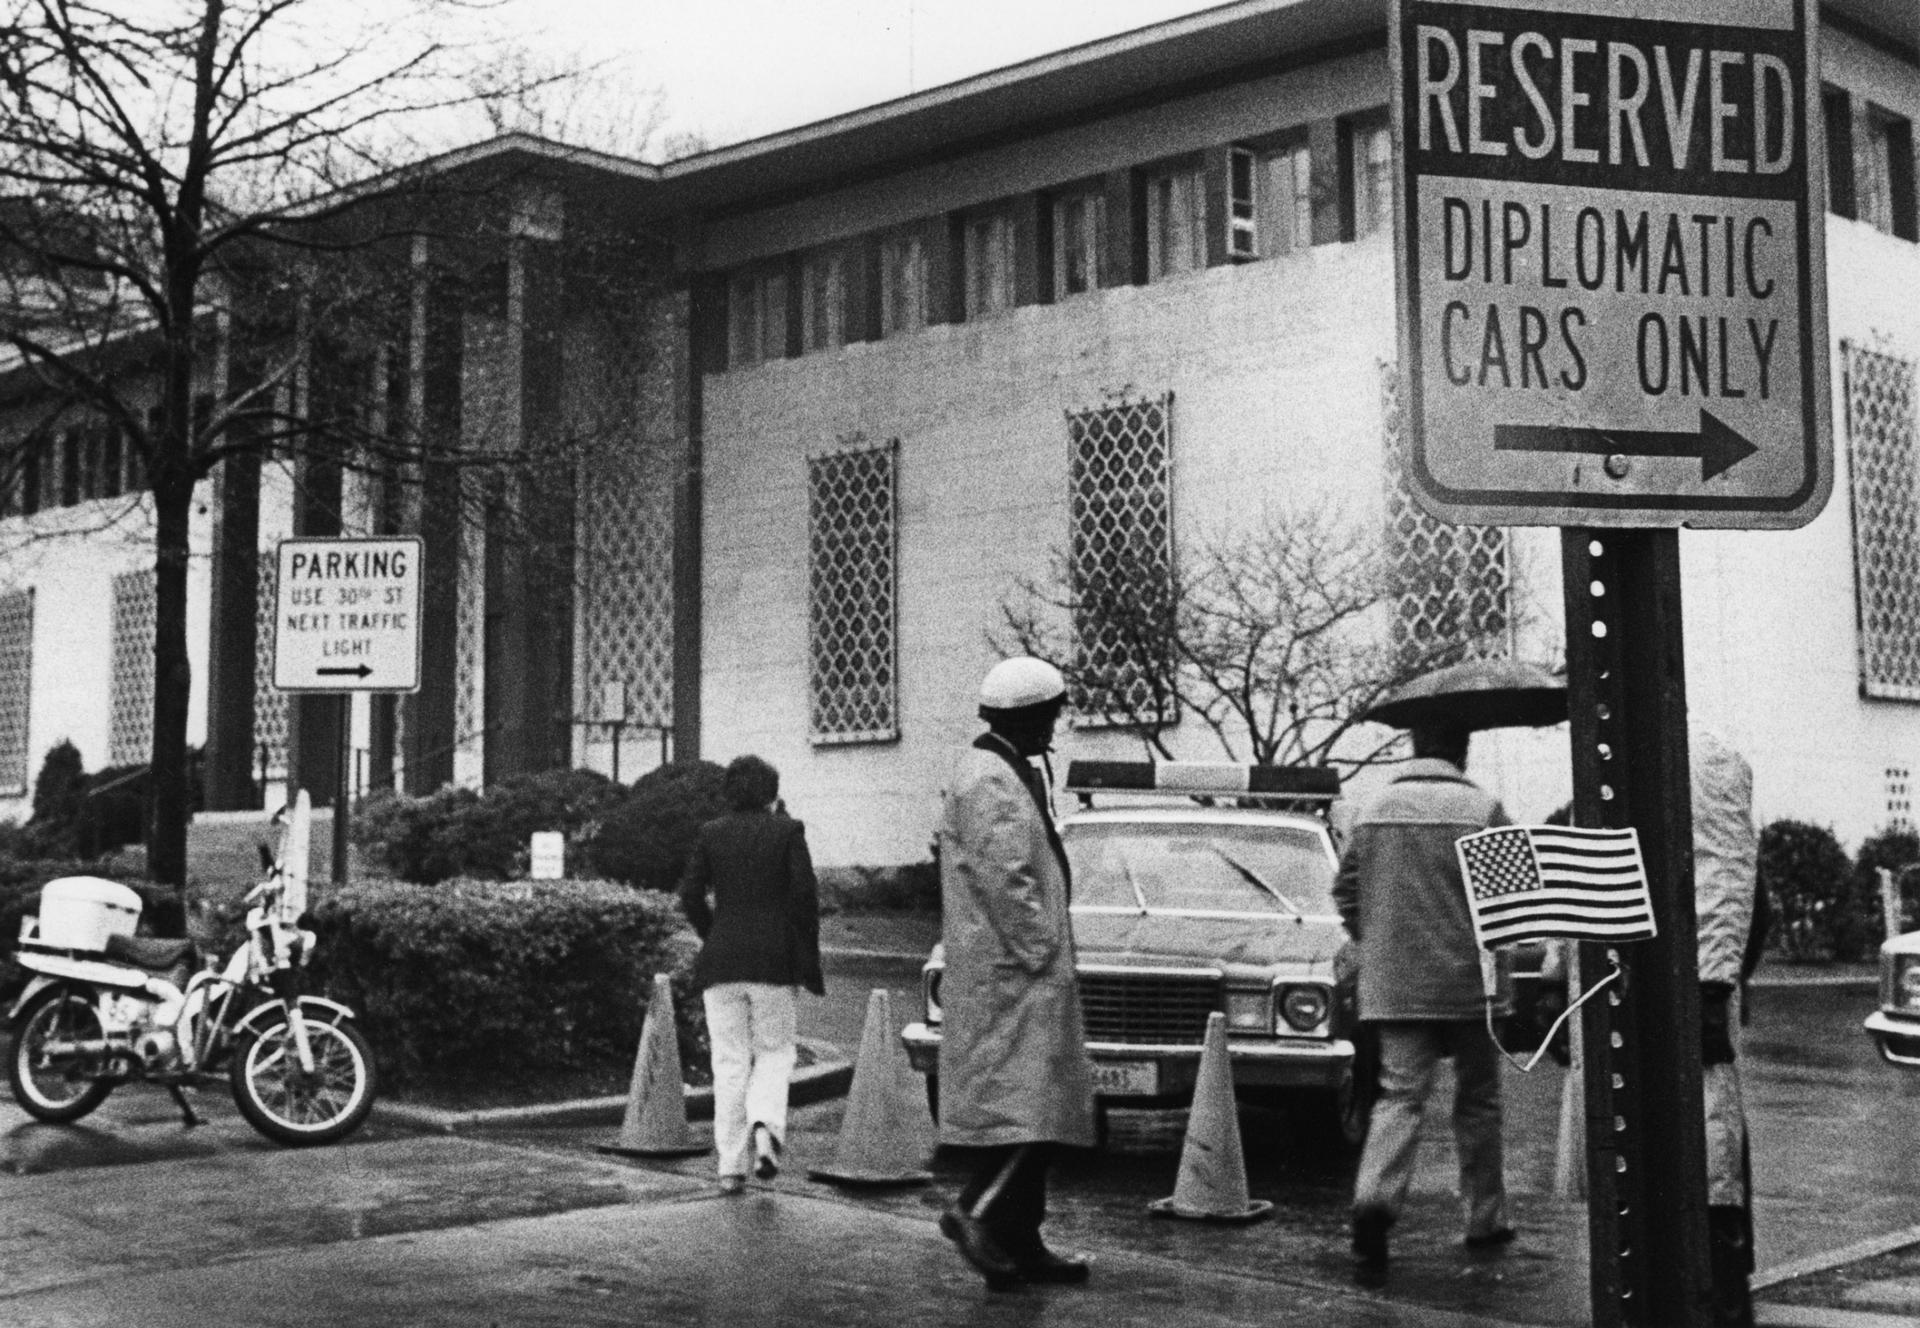 Several people and a police car are shown in this black and white photograph with the former Embassy of Iran in the background.